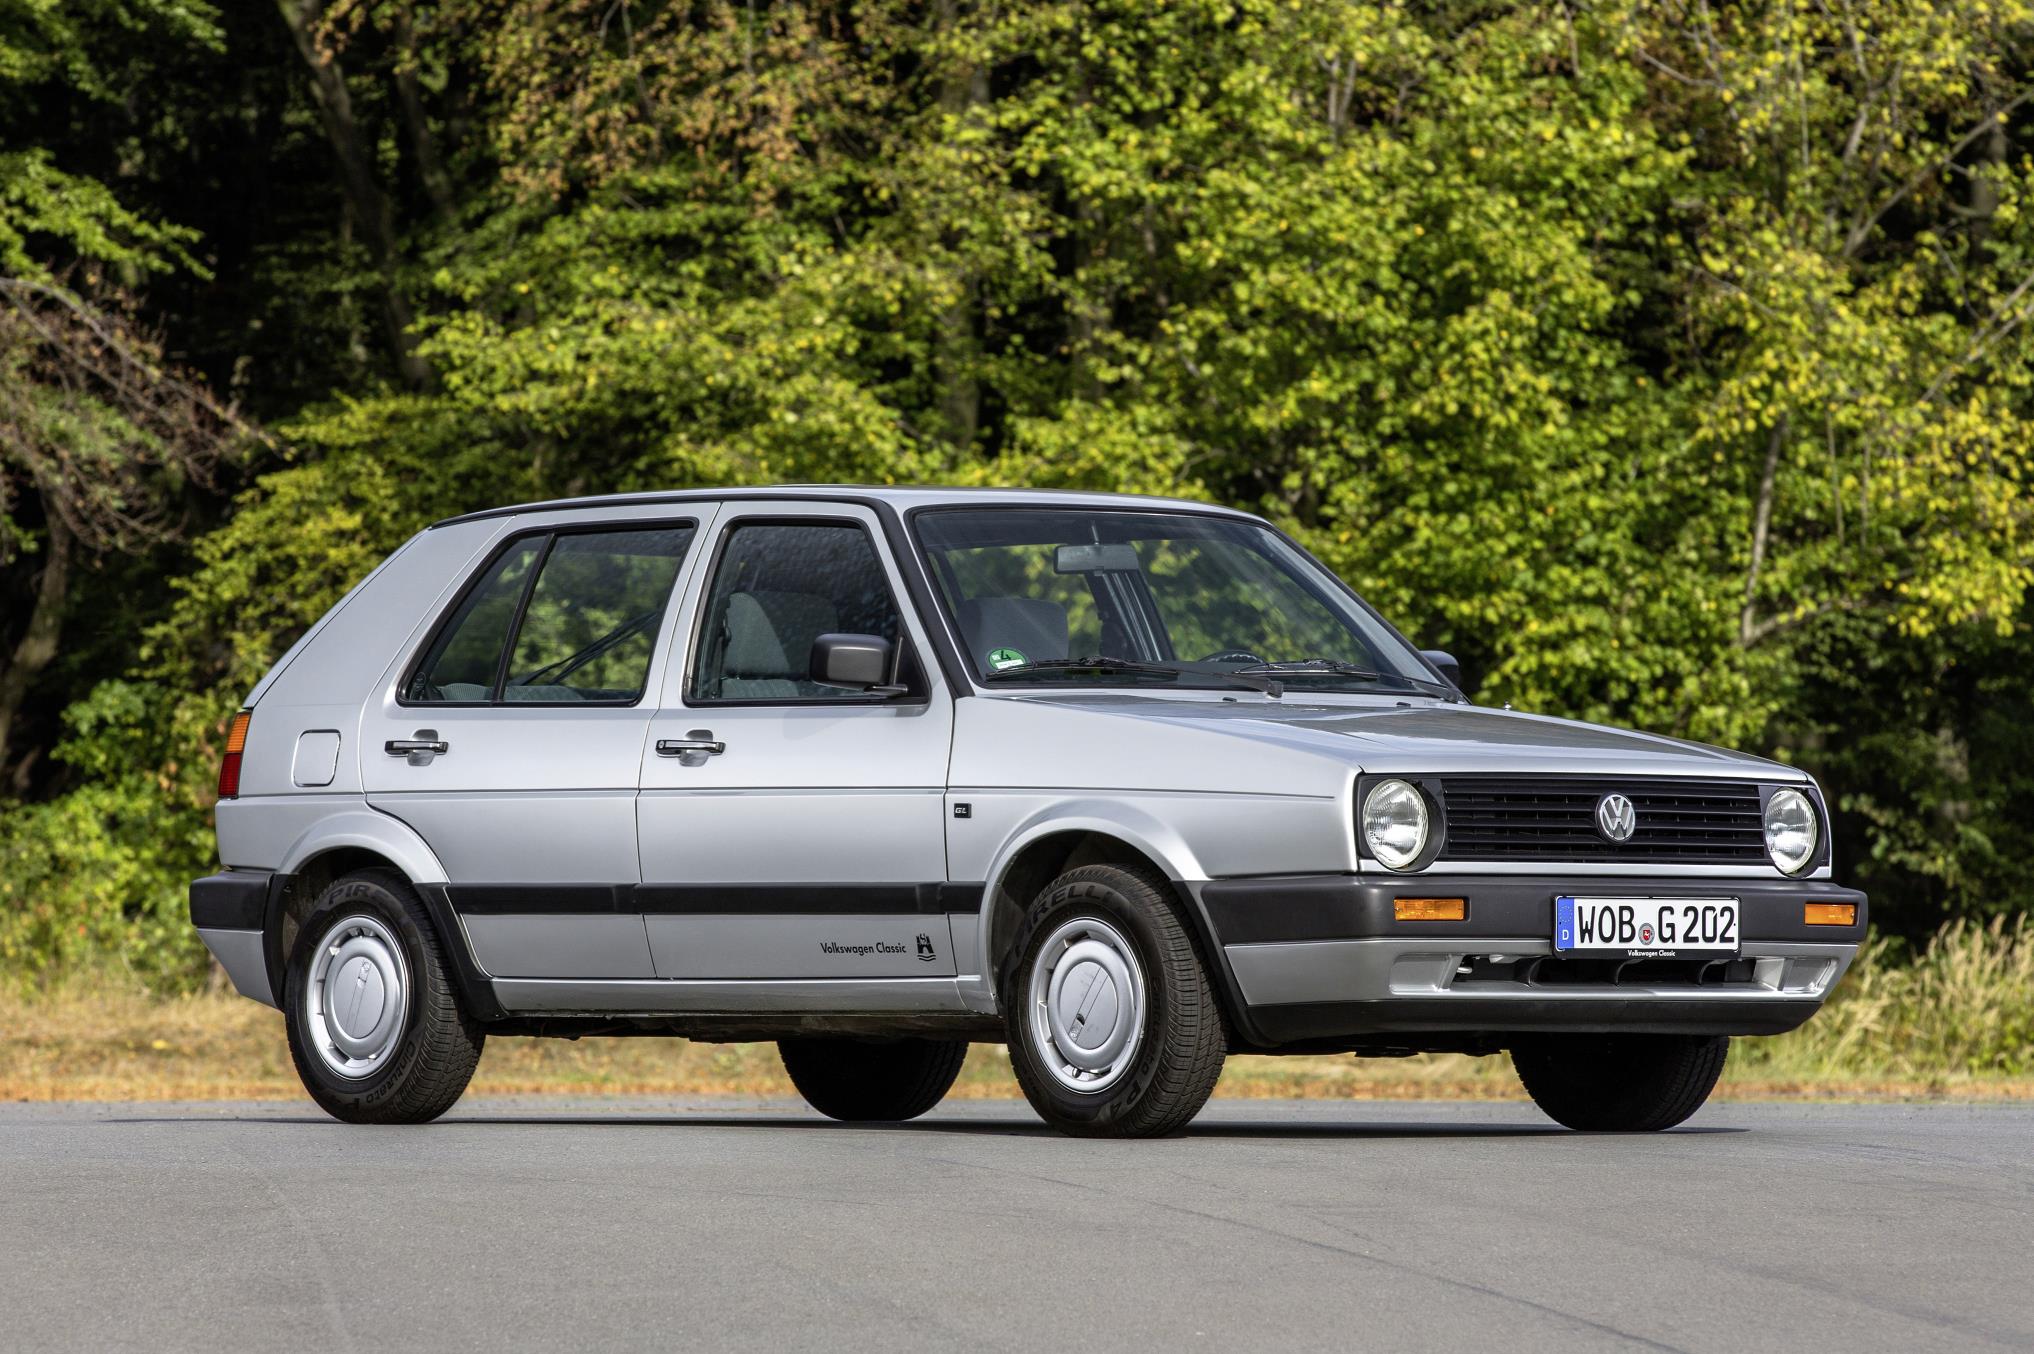 Countdown To New Golf In November 2016 Continues With Golf Mk2